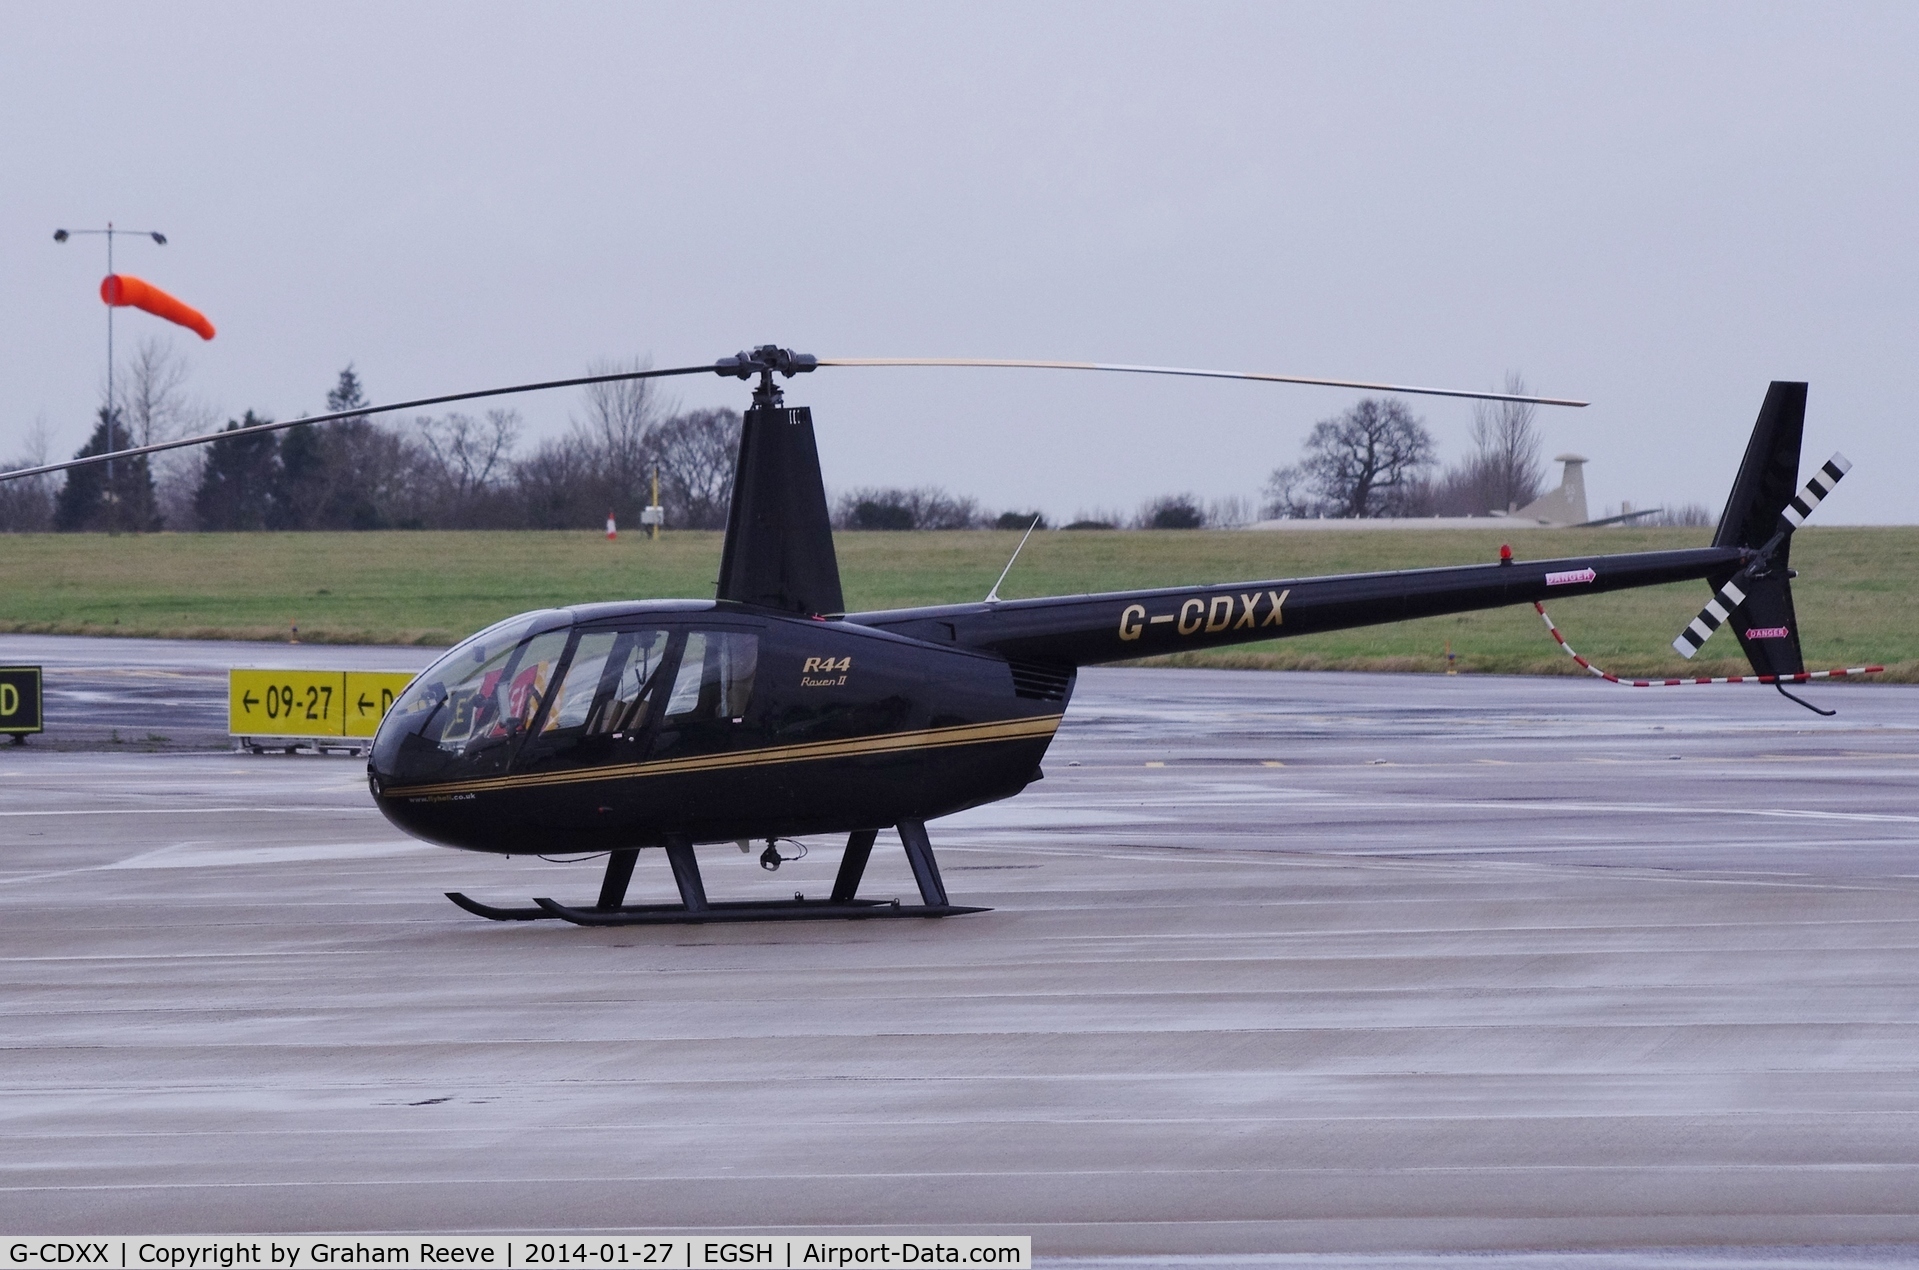 G-CDXX, 2005 Robinson R44 Raven II C/N 10624, Parked at Norwich.